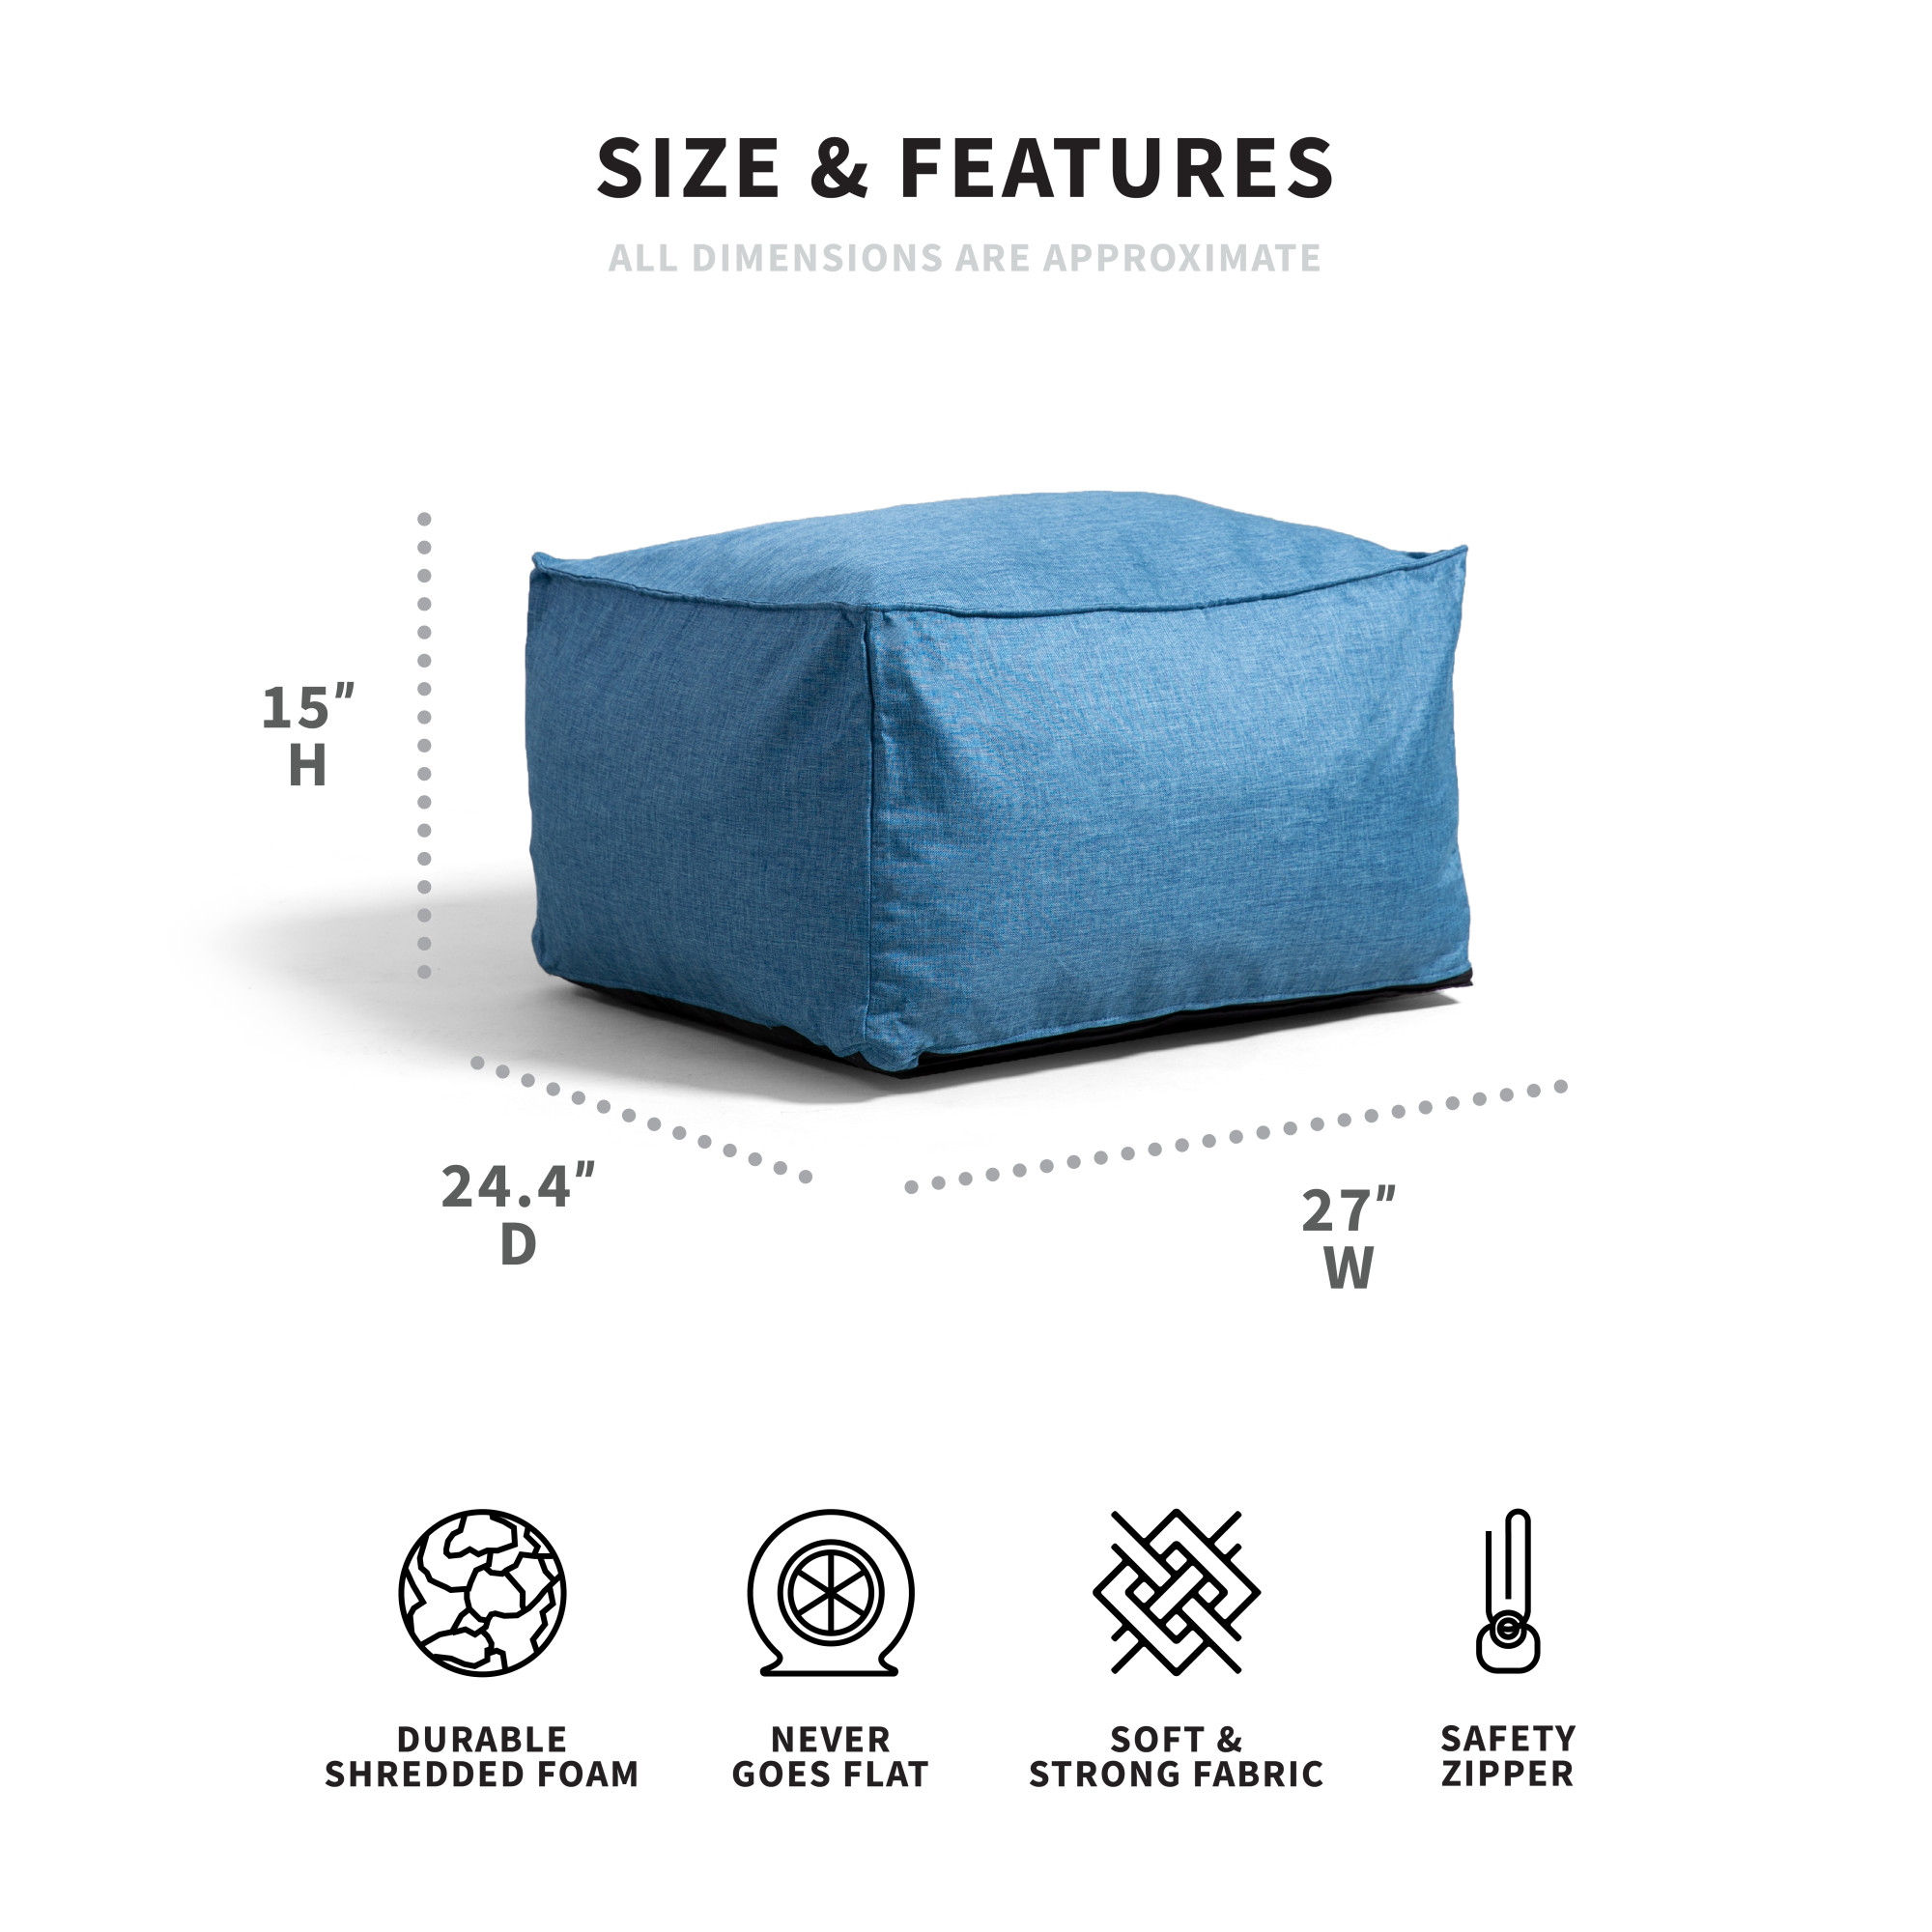 Big Joe Imperial Lounger Ottoman Foam Filled Bean Bag with Removable Cover, Pacific Blue Union, Durable Woven Polyester, 2 feet - image 3 of 8